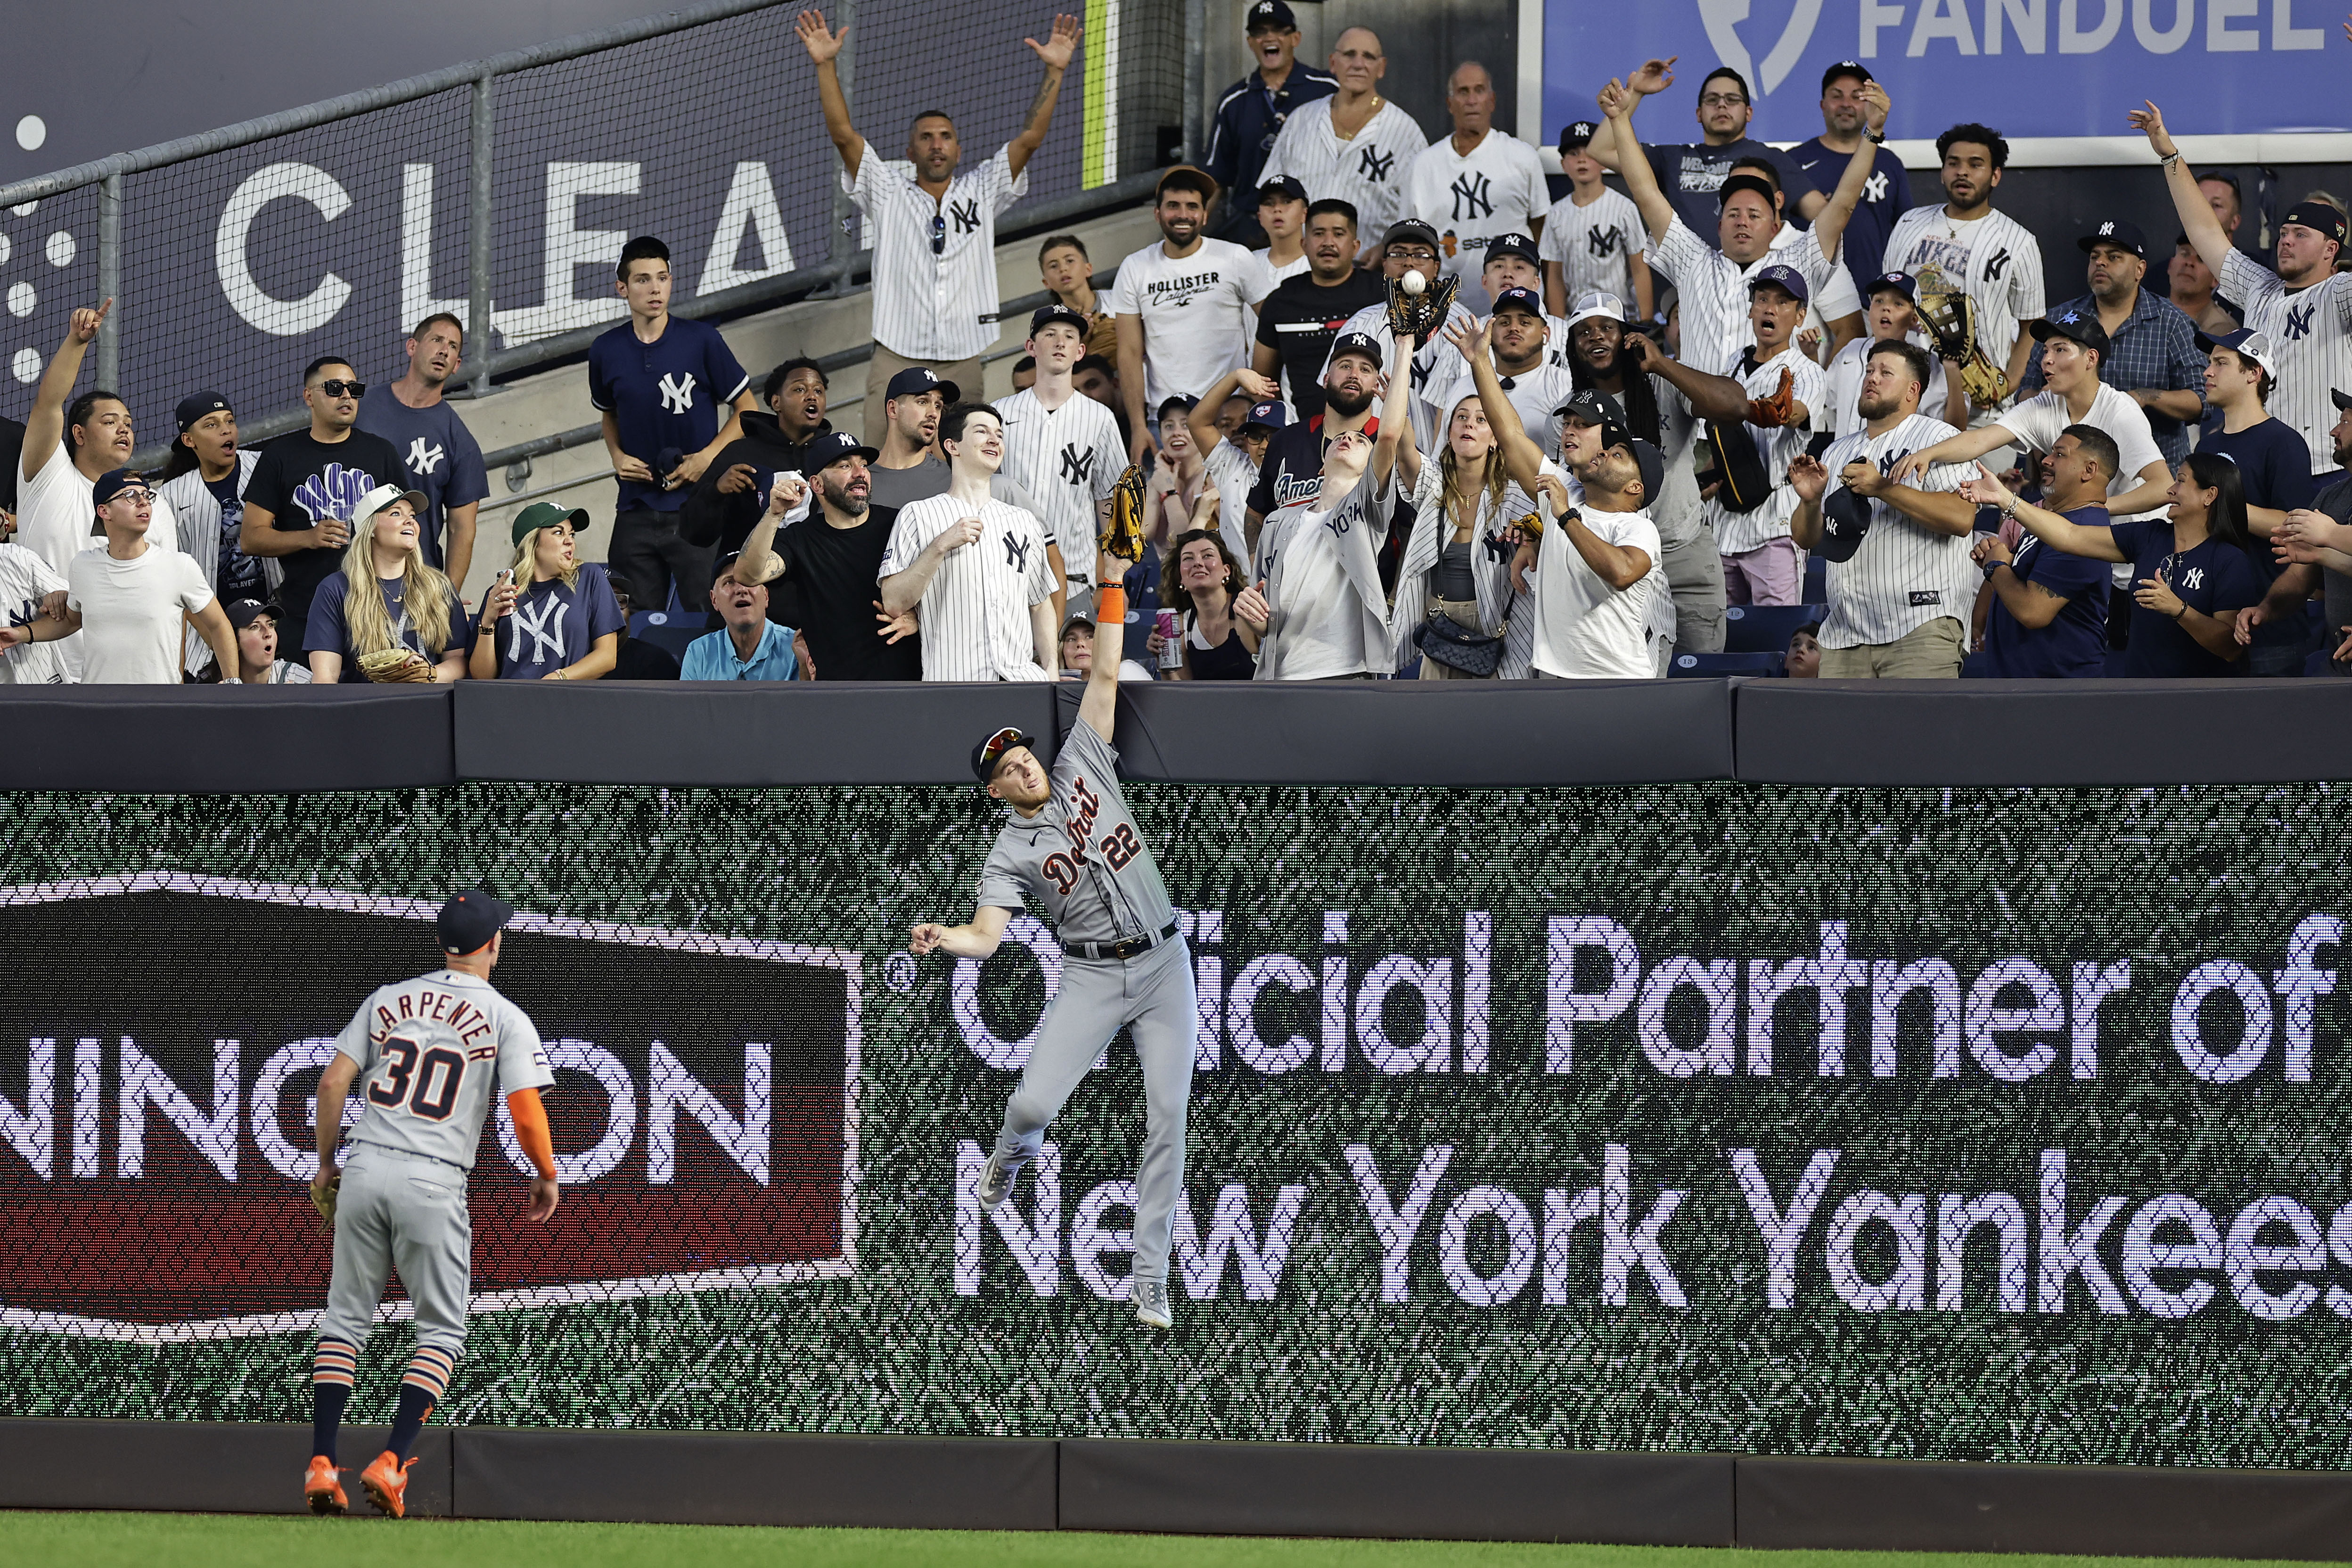 Yankees get two big blasts, beat Tigers in the Bronx 